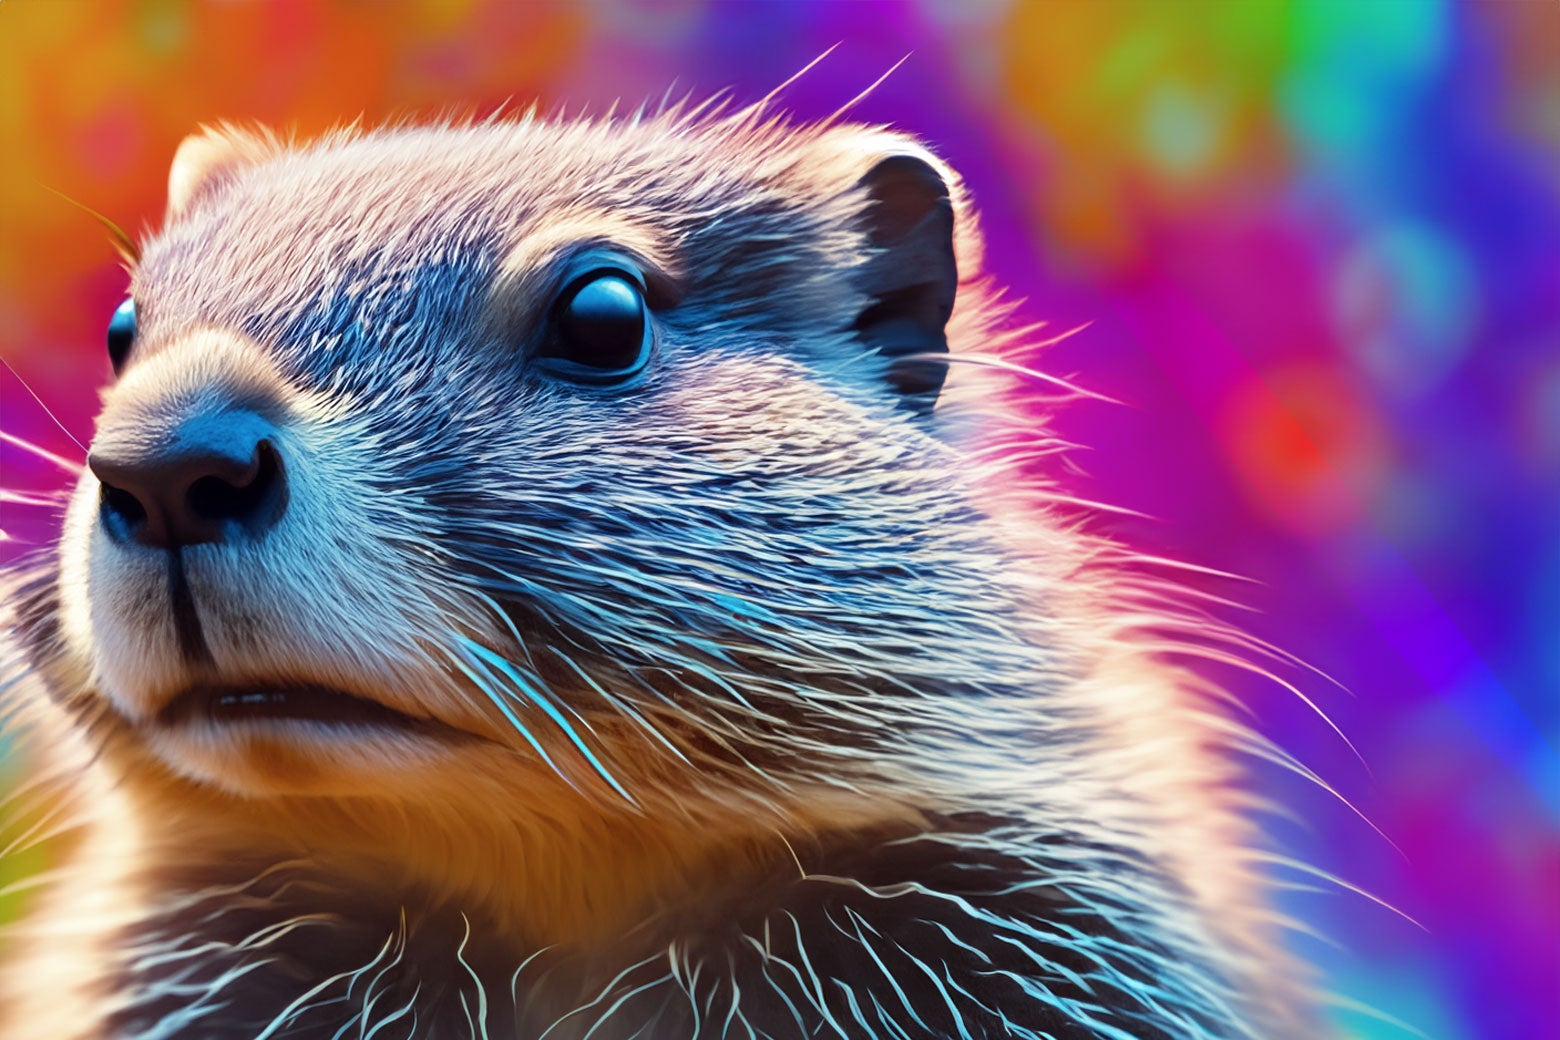 A closeup of a groundhog face looking out from a vibrant magenta, orange, and blue background. 